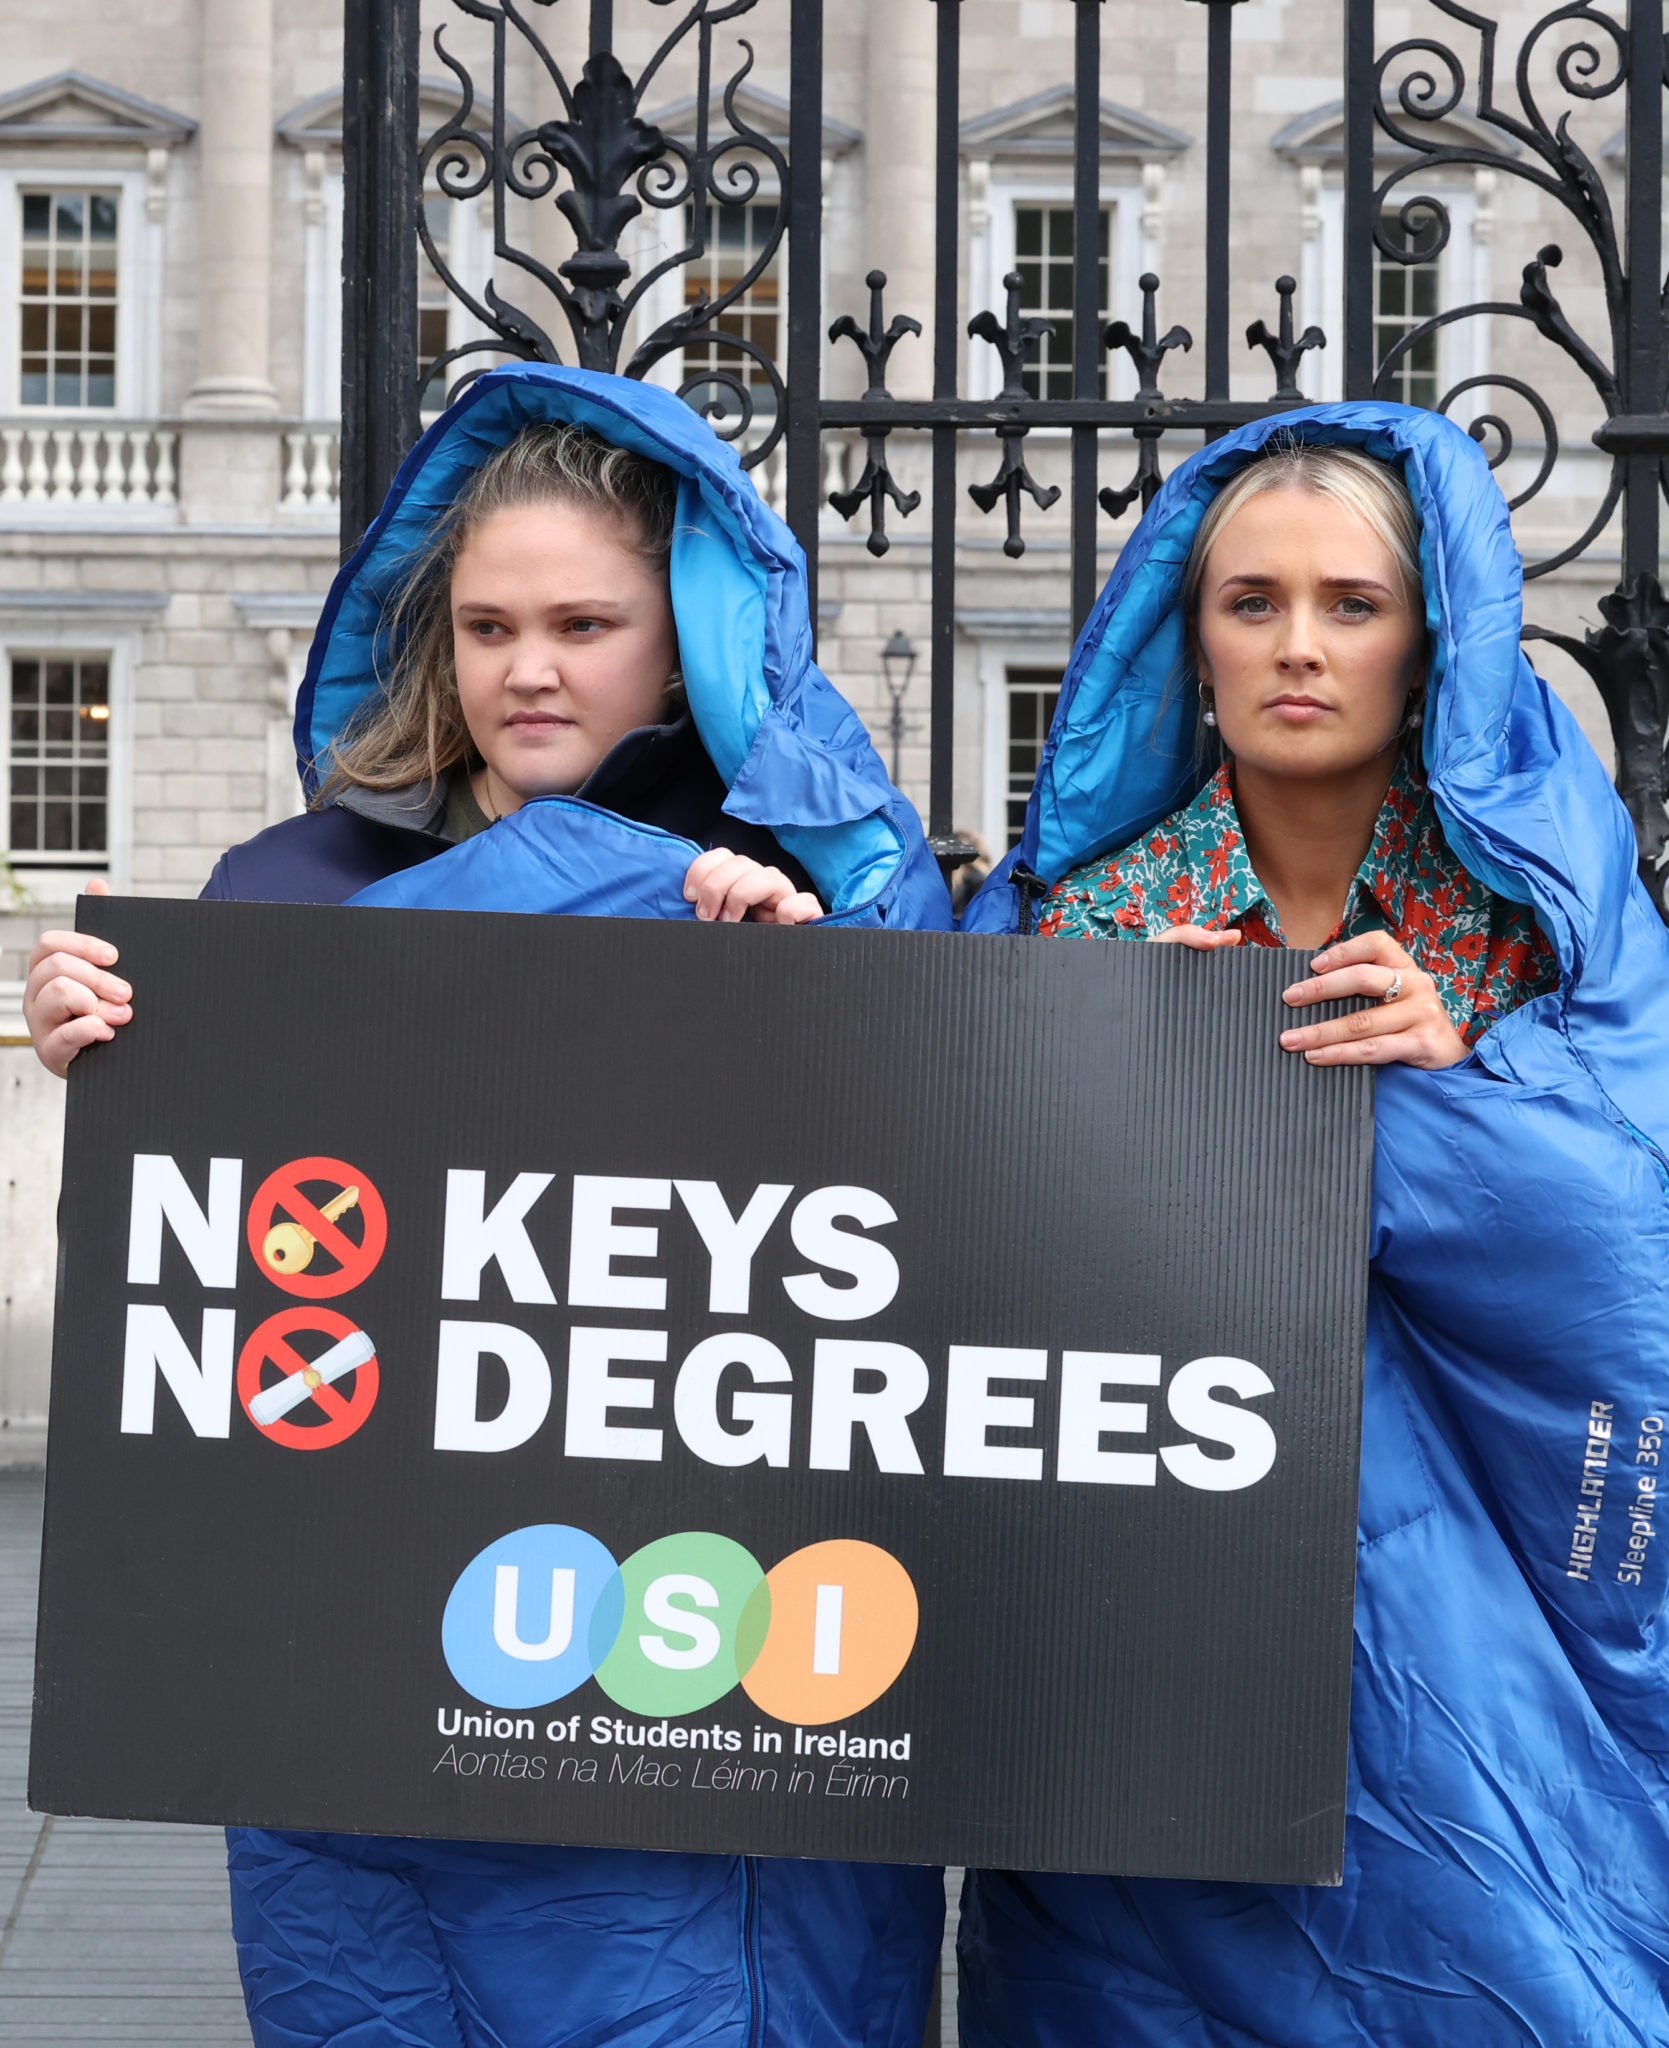 Left to right: UCC Welfare Officer Caoimhe Walsh and President of Cork Students Union Aisling O'Mahony protesting outside the Dáil over unaffordable student accommodation